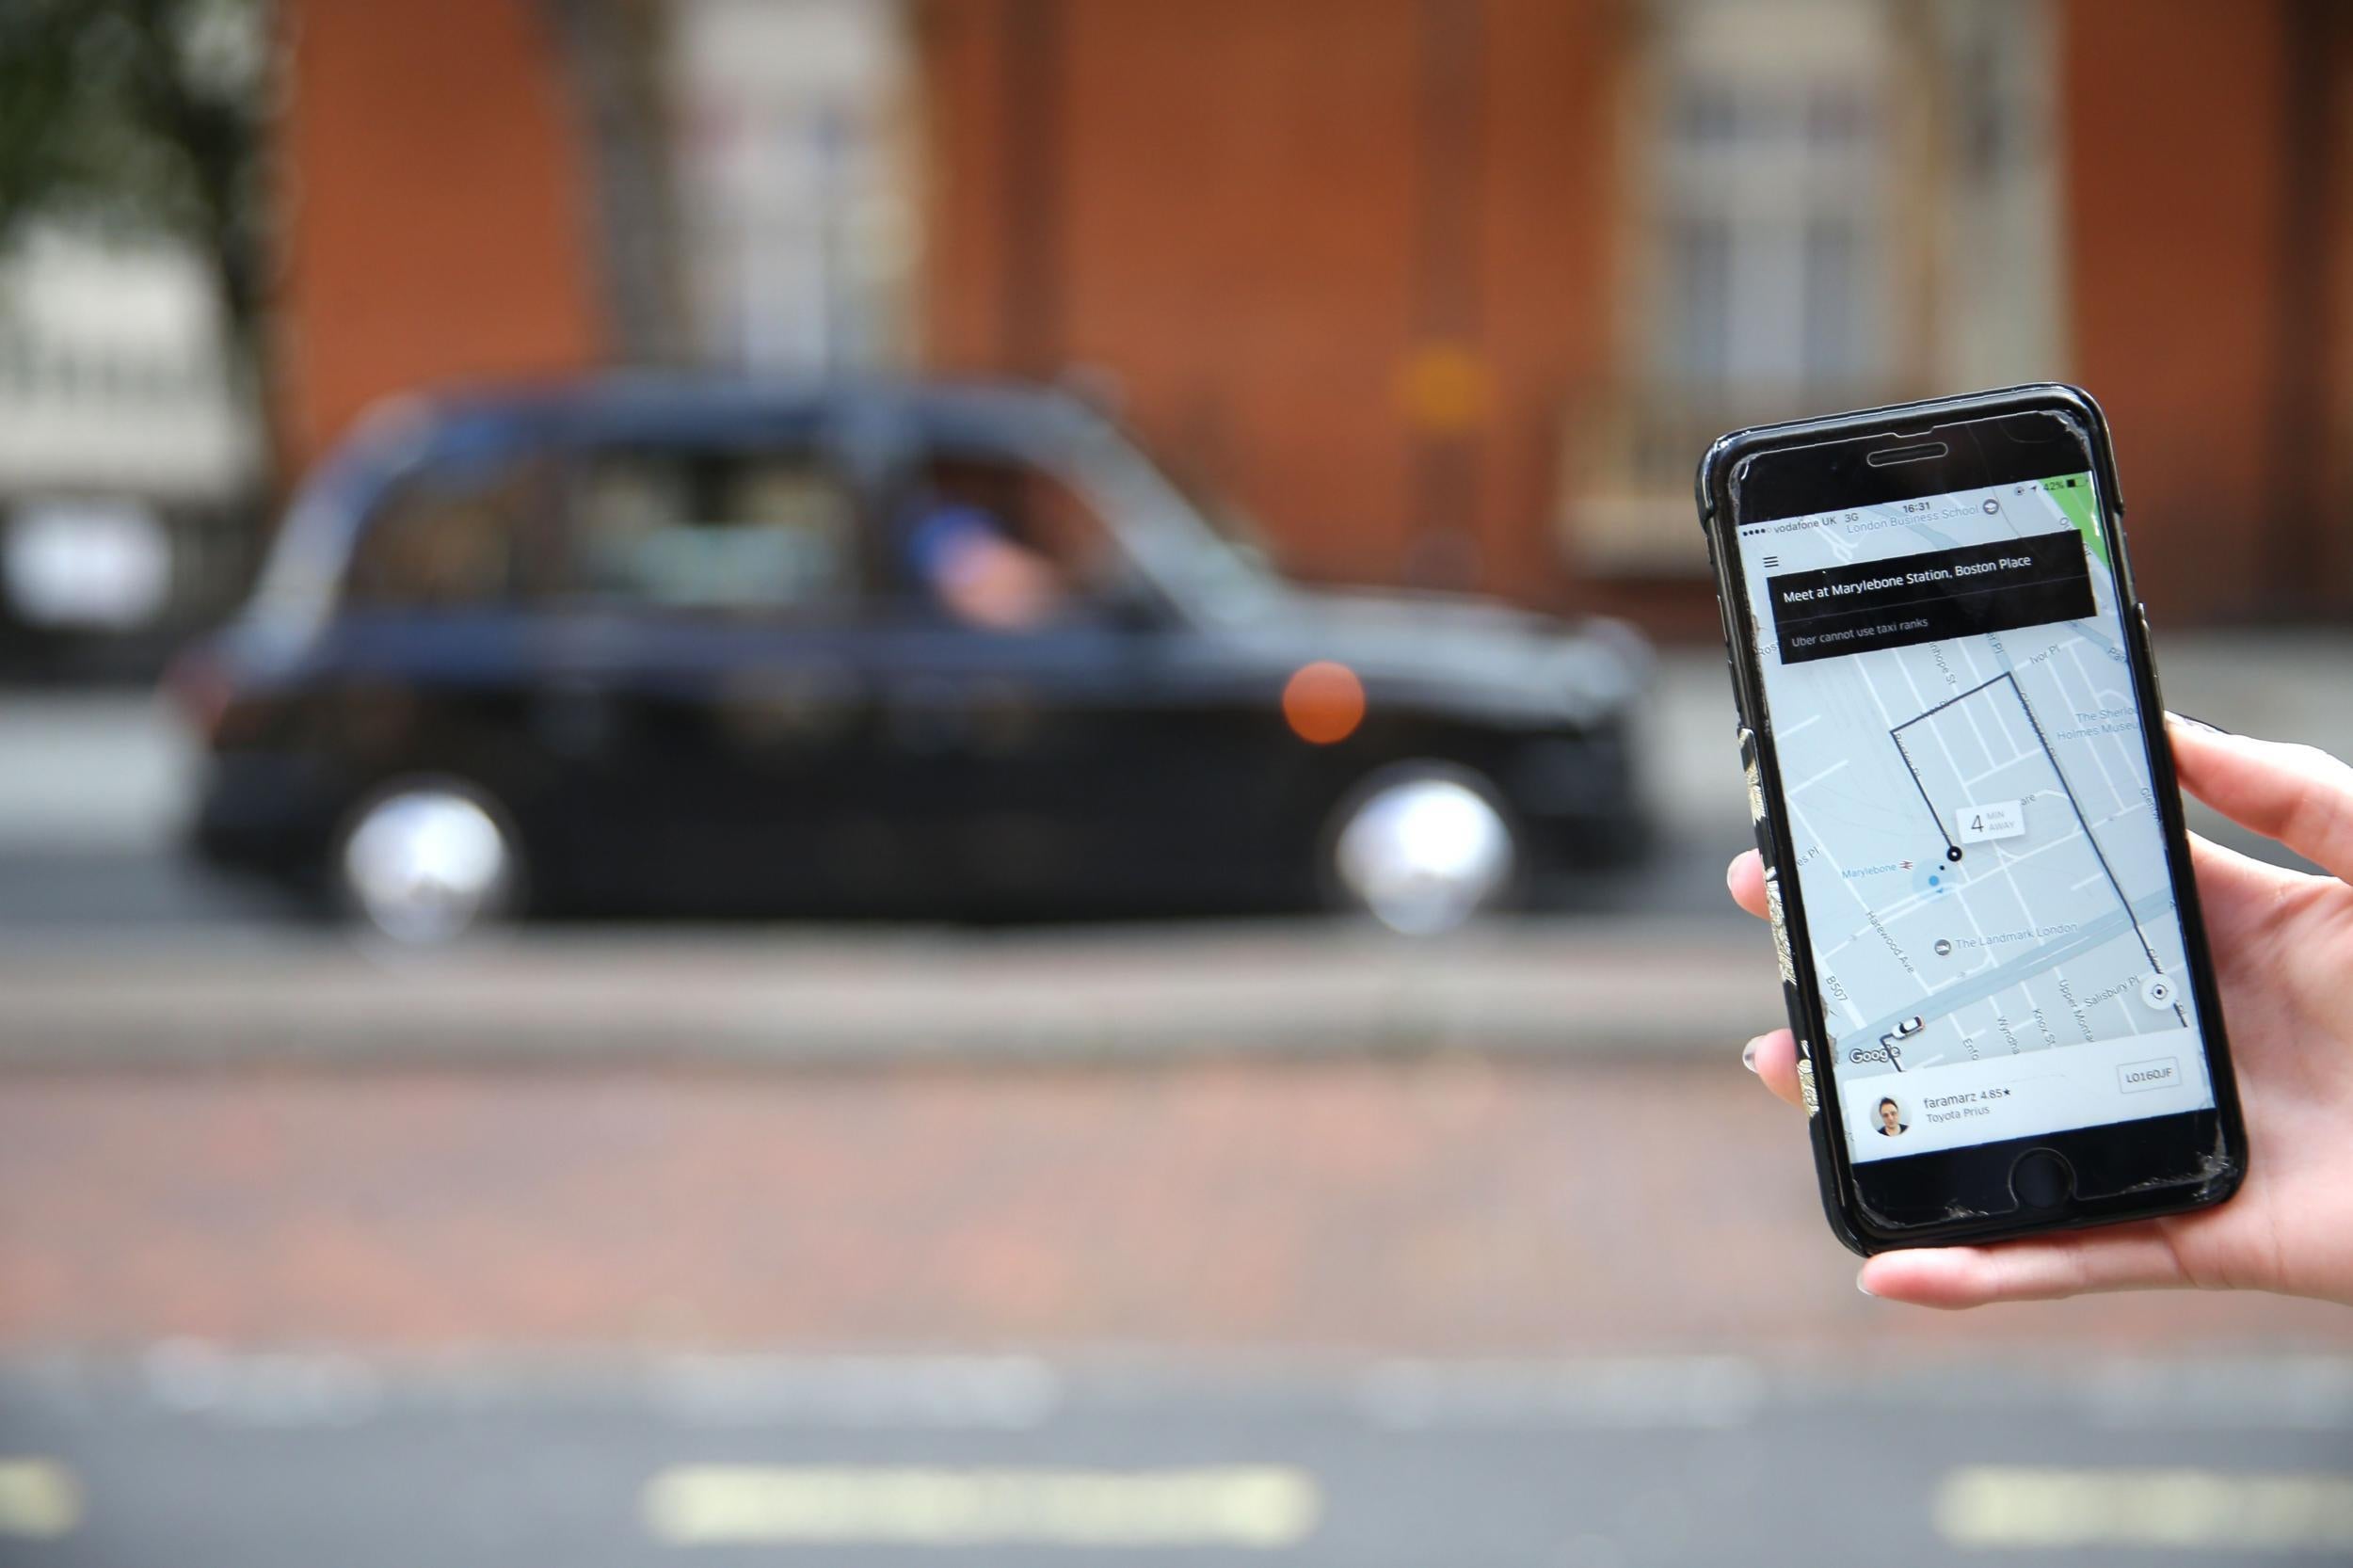 Uber has had its licence revoked in London after concerns about safety